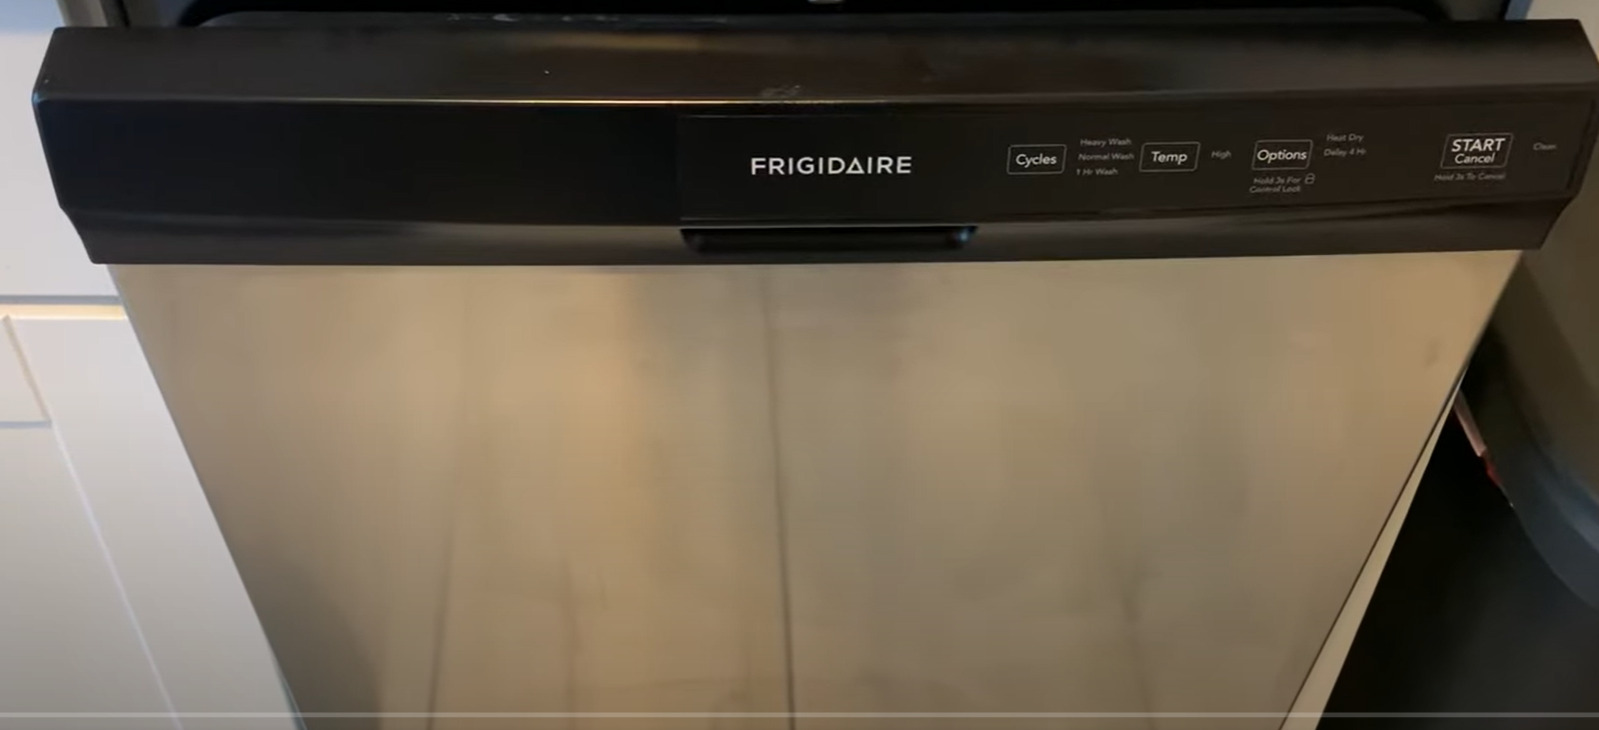 How to Start Frigidaire Dishwasher: Quick and Easy Guide